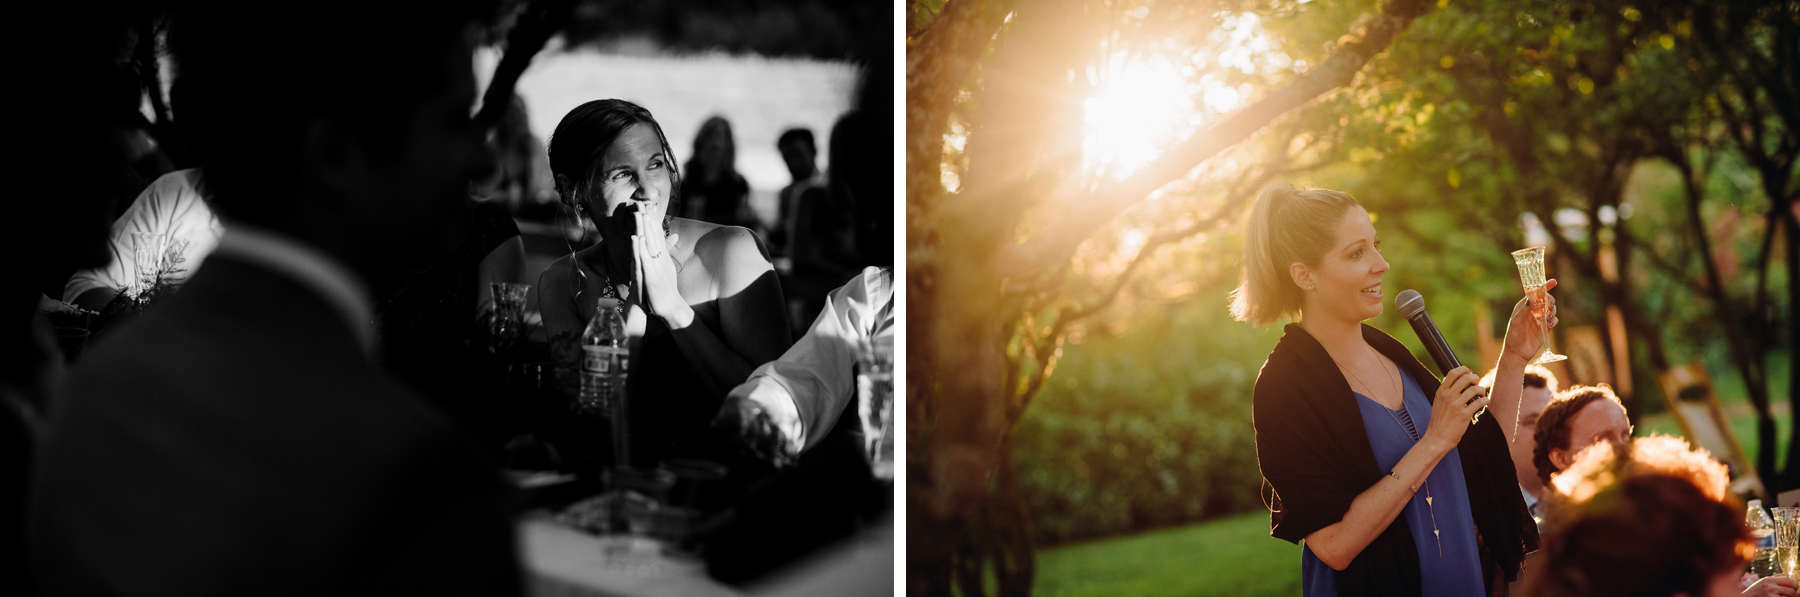 Center for Urban Horticulture Wedding toasts 